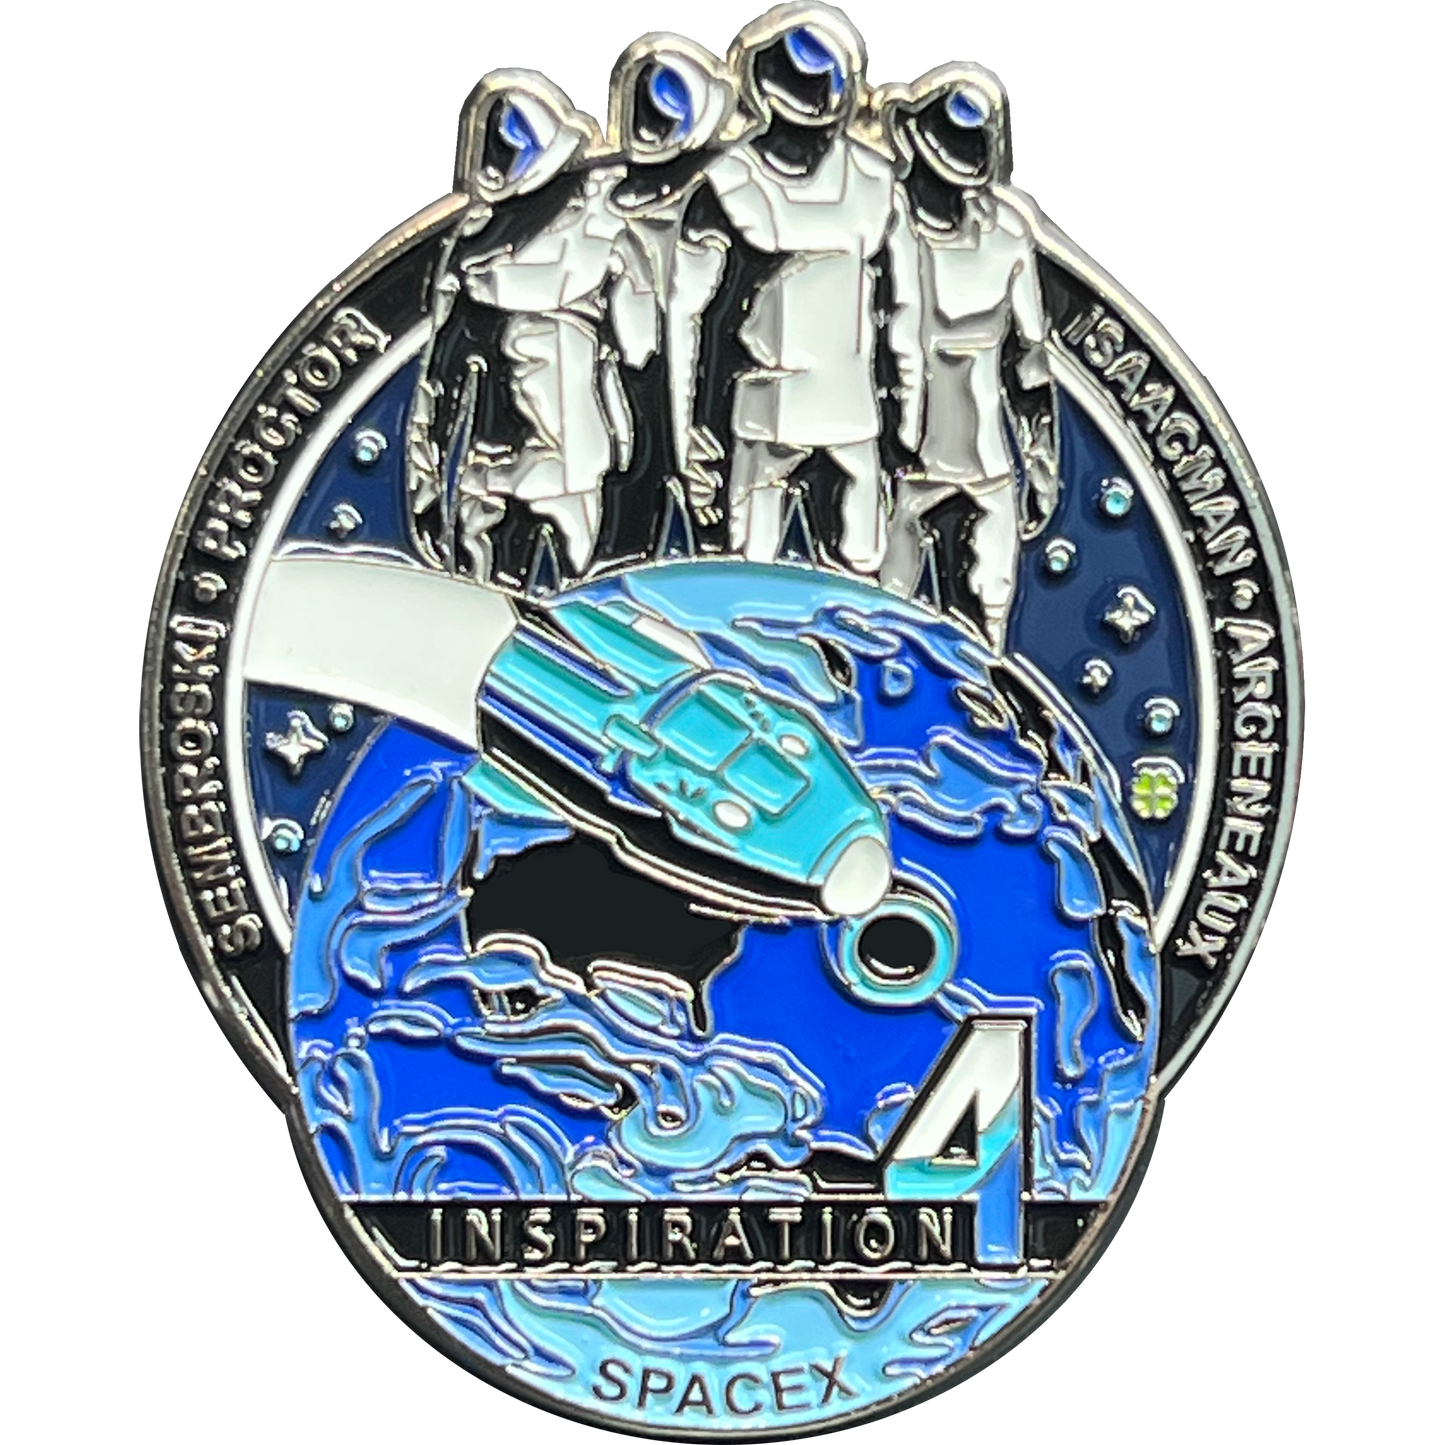 GL1-005 SpaceX Inspiration4 commemorative pin first all-civilian space flight on Space X Dragon Inspiration 4